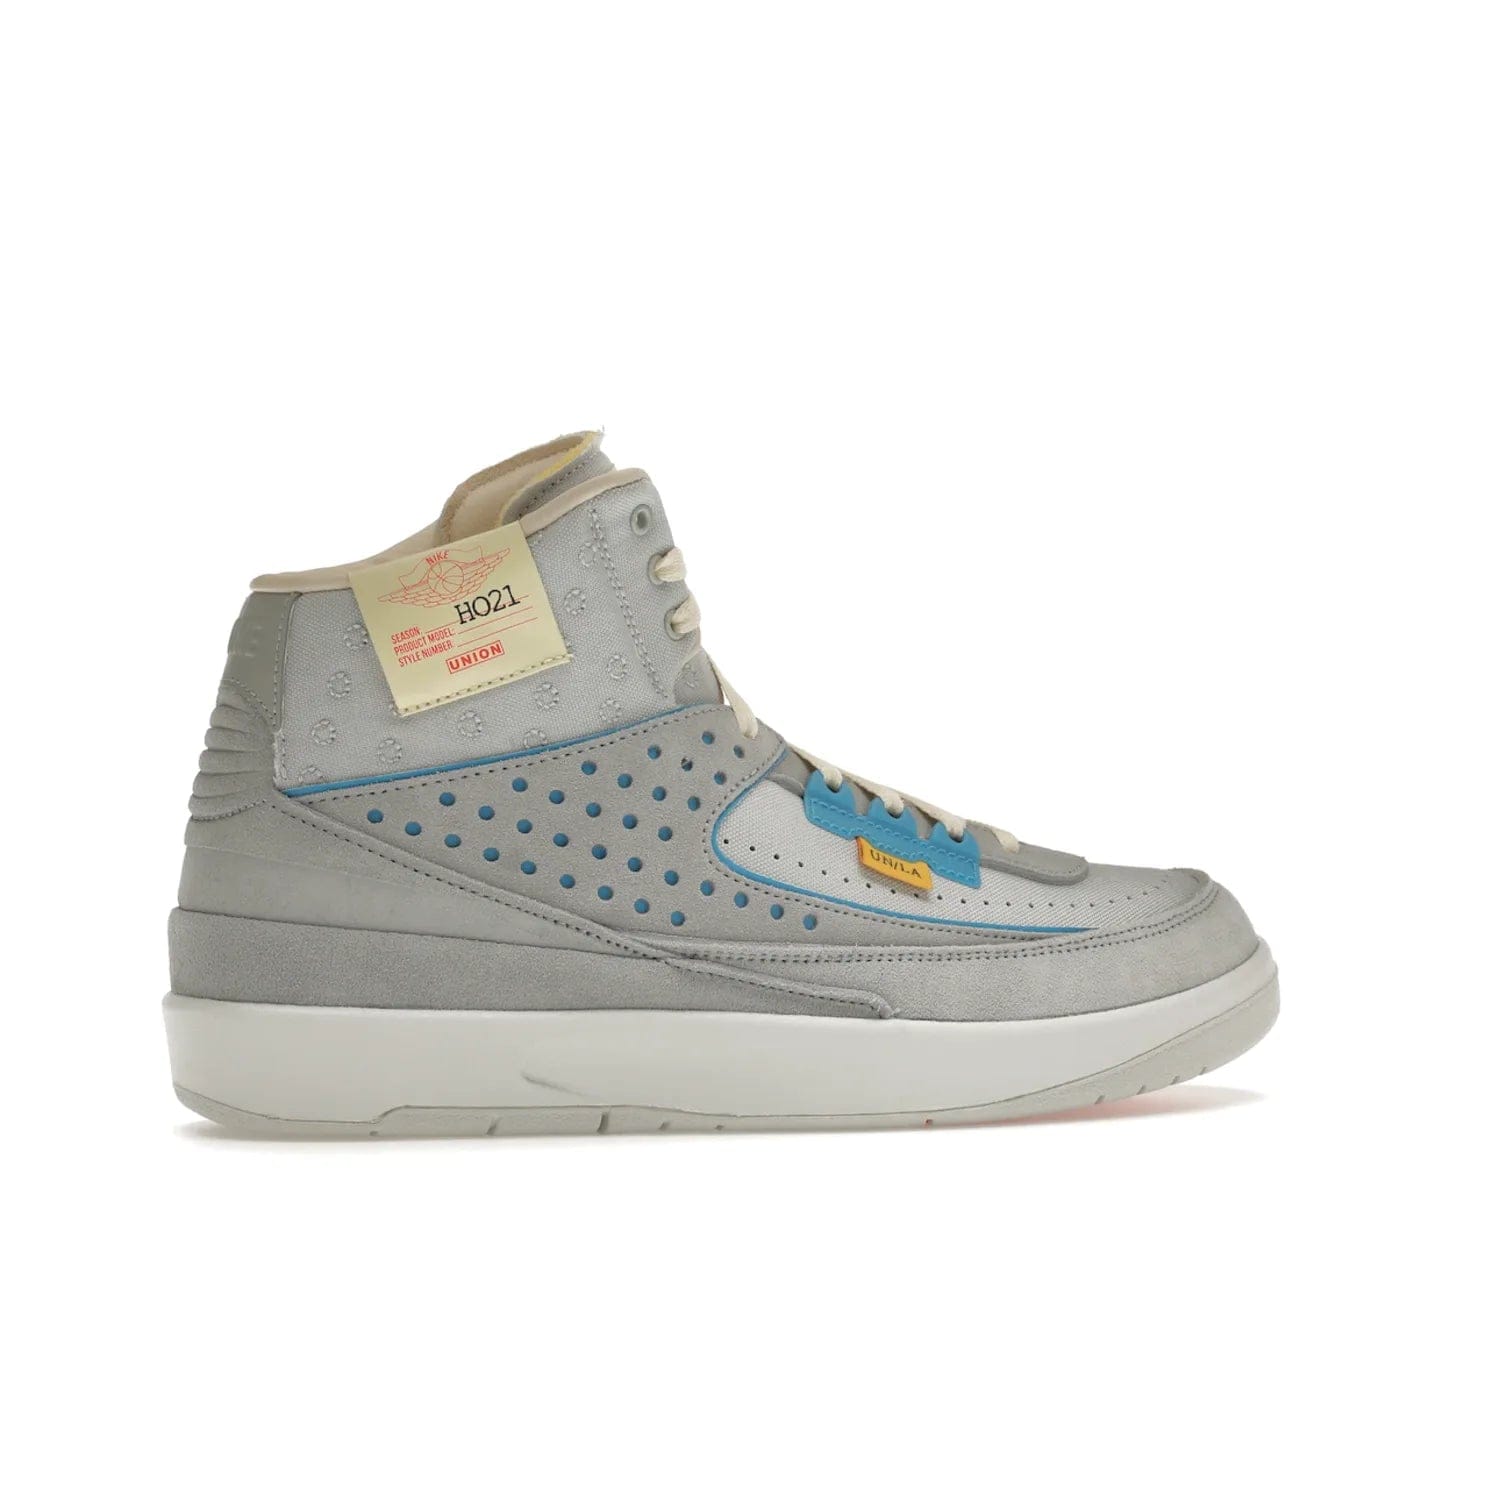 Jordan 2 Retro SP Union Grey Fog - Image 35 - Only at www.BallersClubKickz.com - Introducing the Air Jordan 2 Retro SP Union Grey Fog. This intricate sneaker design features a grey canvas upper with light blue eyelets, eyestay patches, and piping, plus custom external tags. Dropping in April 2022, this exclusive release offers a worn-in look and feel.